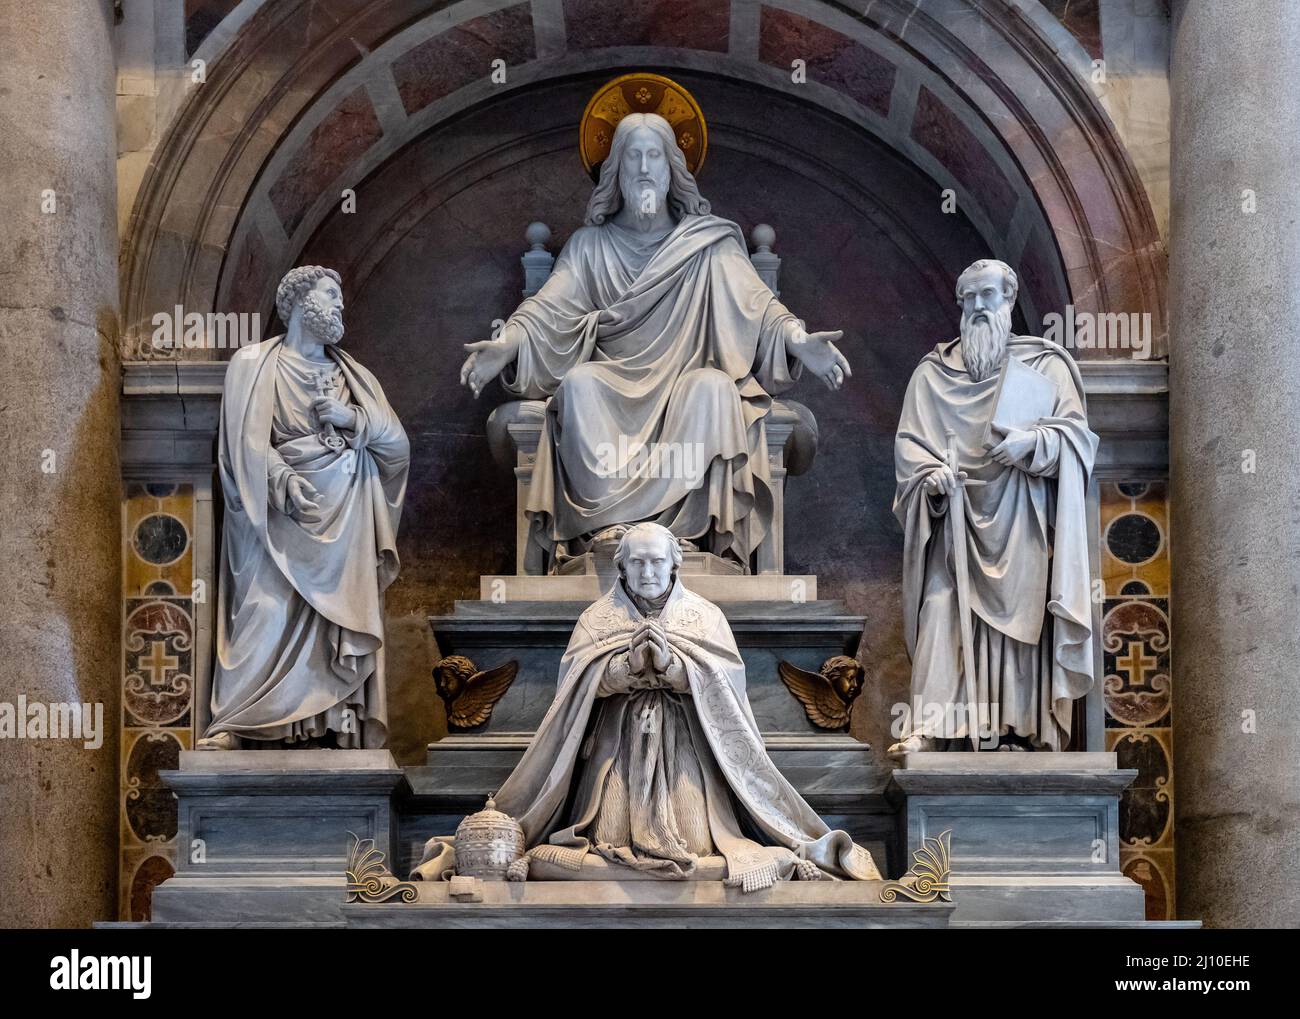 Rome, Italy - May 27, 2018: Monument of pope Pius VIII Francesco Castiglioni by Pietro Tenerani, at right nave of papal St. Peter's Basilica Stock Photo